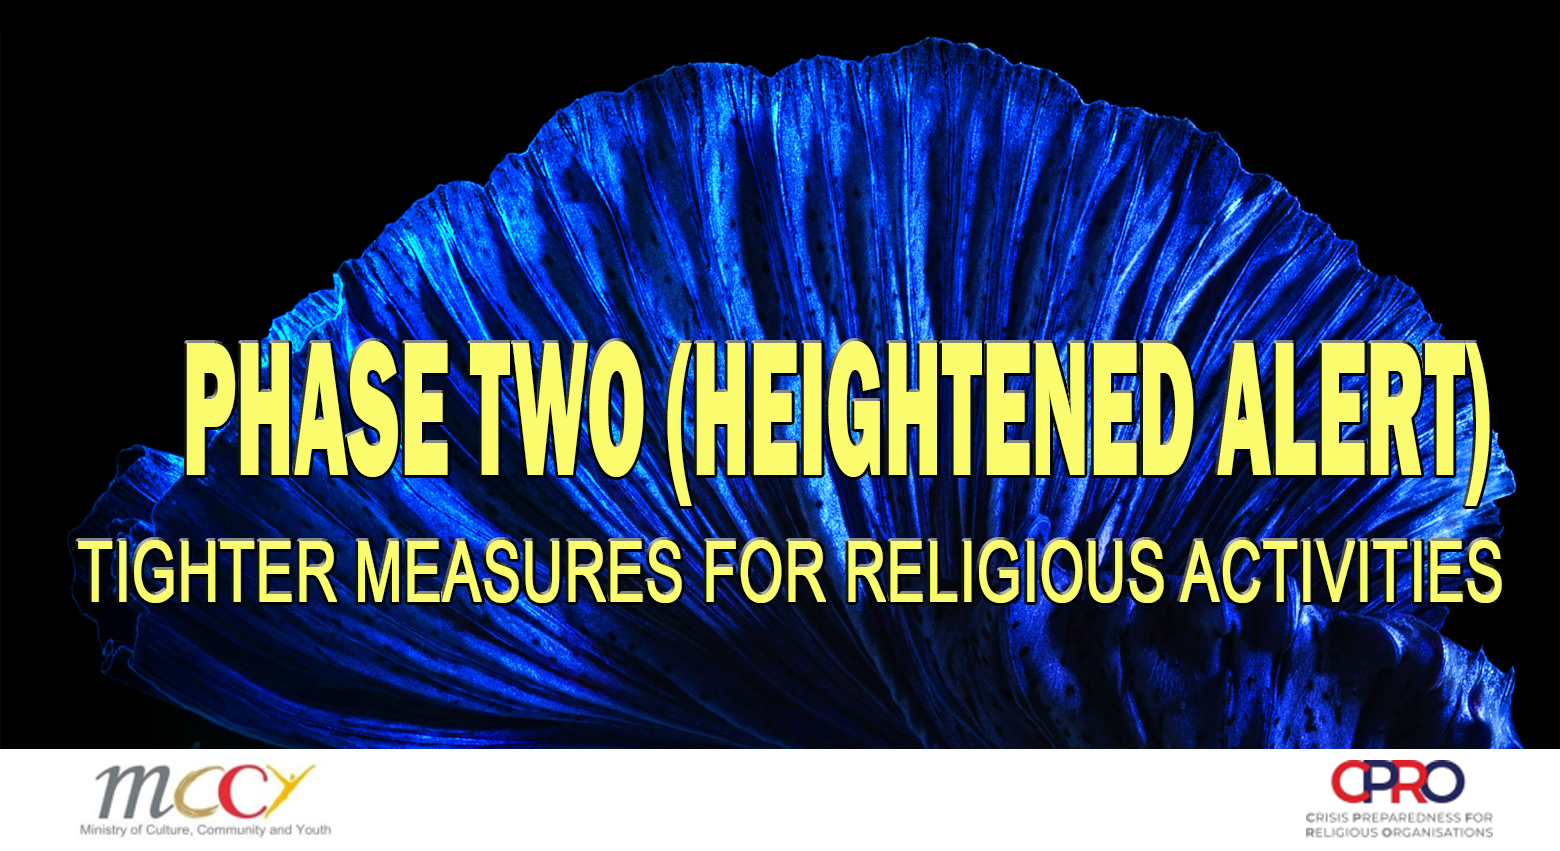 PHASE TWO (HEIGHTENED ALERT) TIGHTER MEASURES FOR RELIGIOUS ACTIVITIES